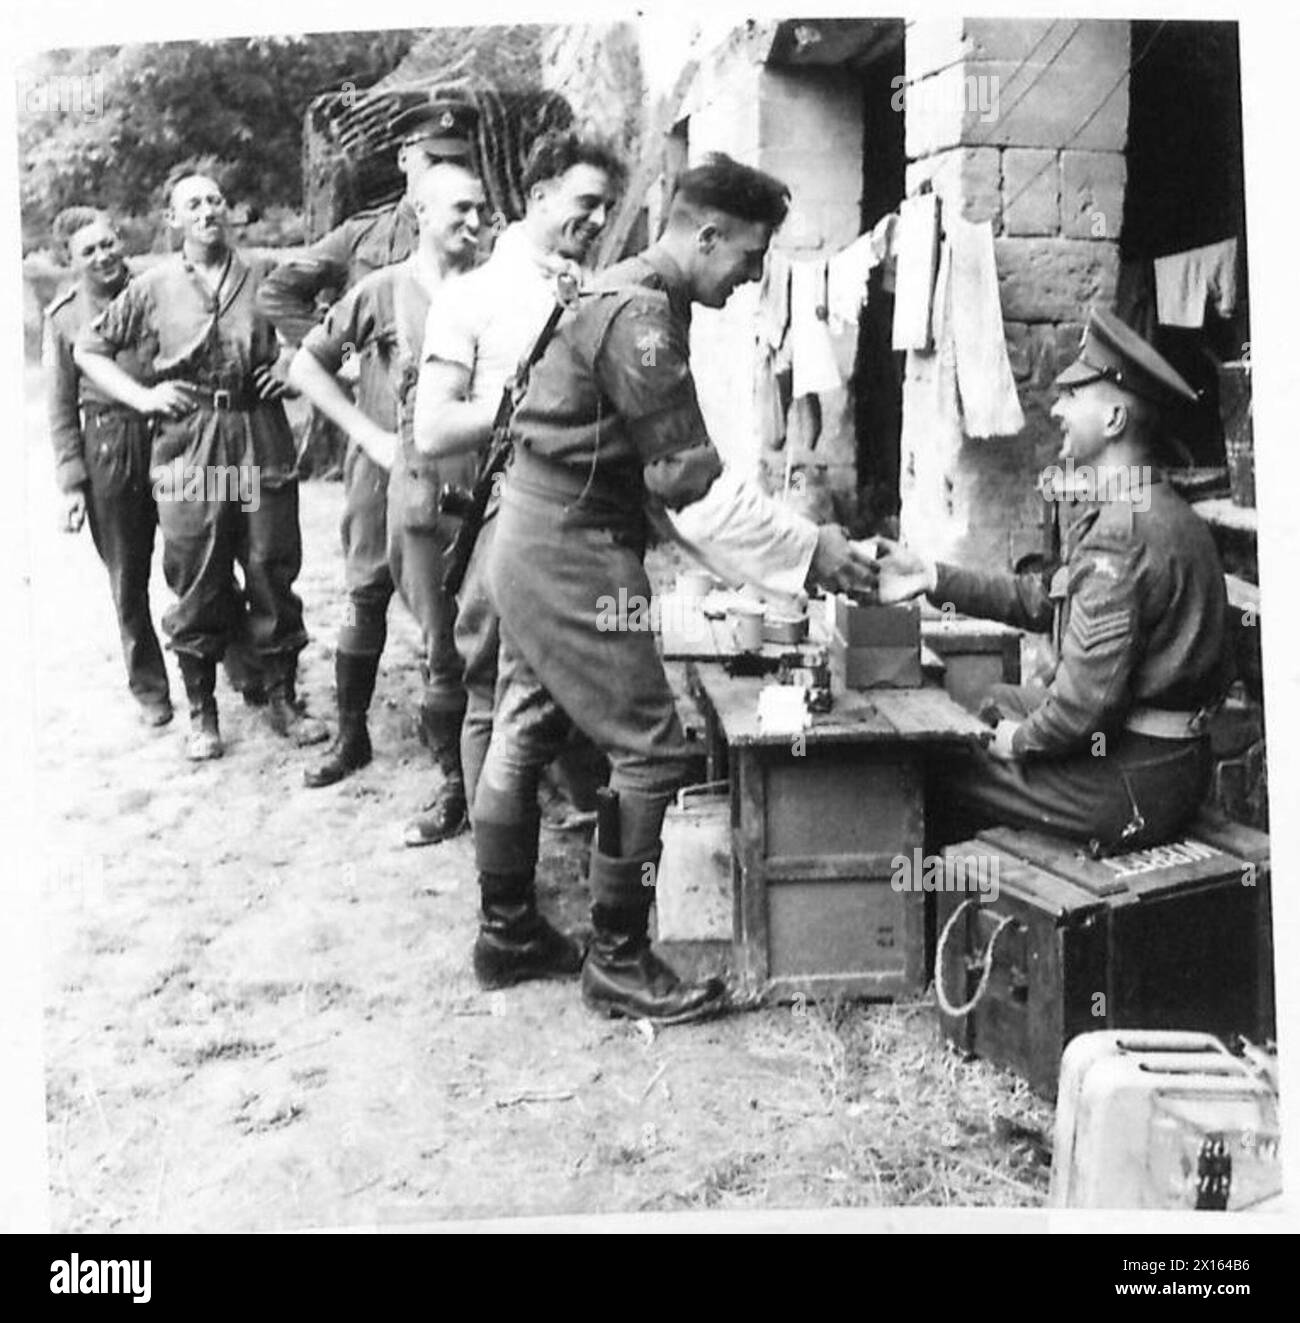 MILITARY POLICE IN FRANCE - Sergeant Brett of the Isle of Wight is seen issuing the NAAFI pack which has just arrived. It consists of 1 razor blade, 1 cake of soap and 50 cigarettes. 8th Corps, 110 CMP British Army, 21st Army Group Stock Photo